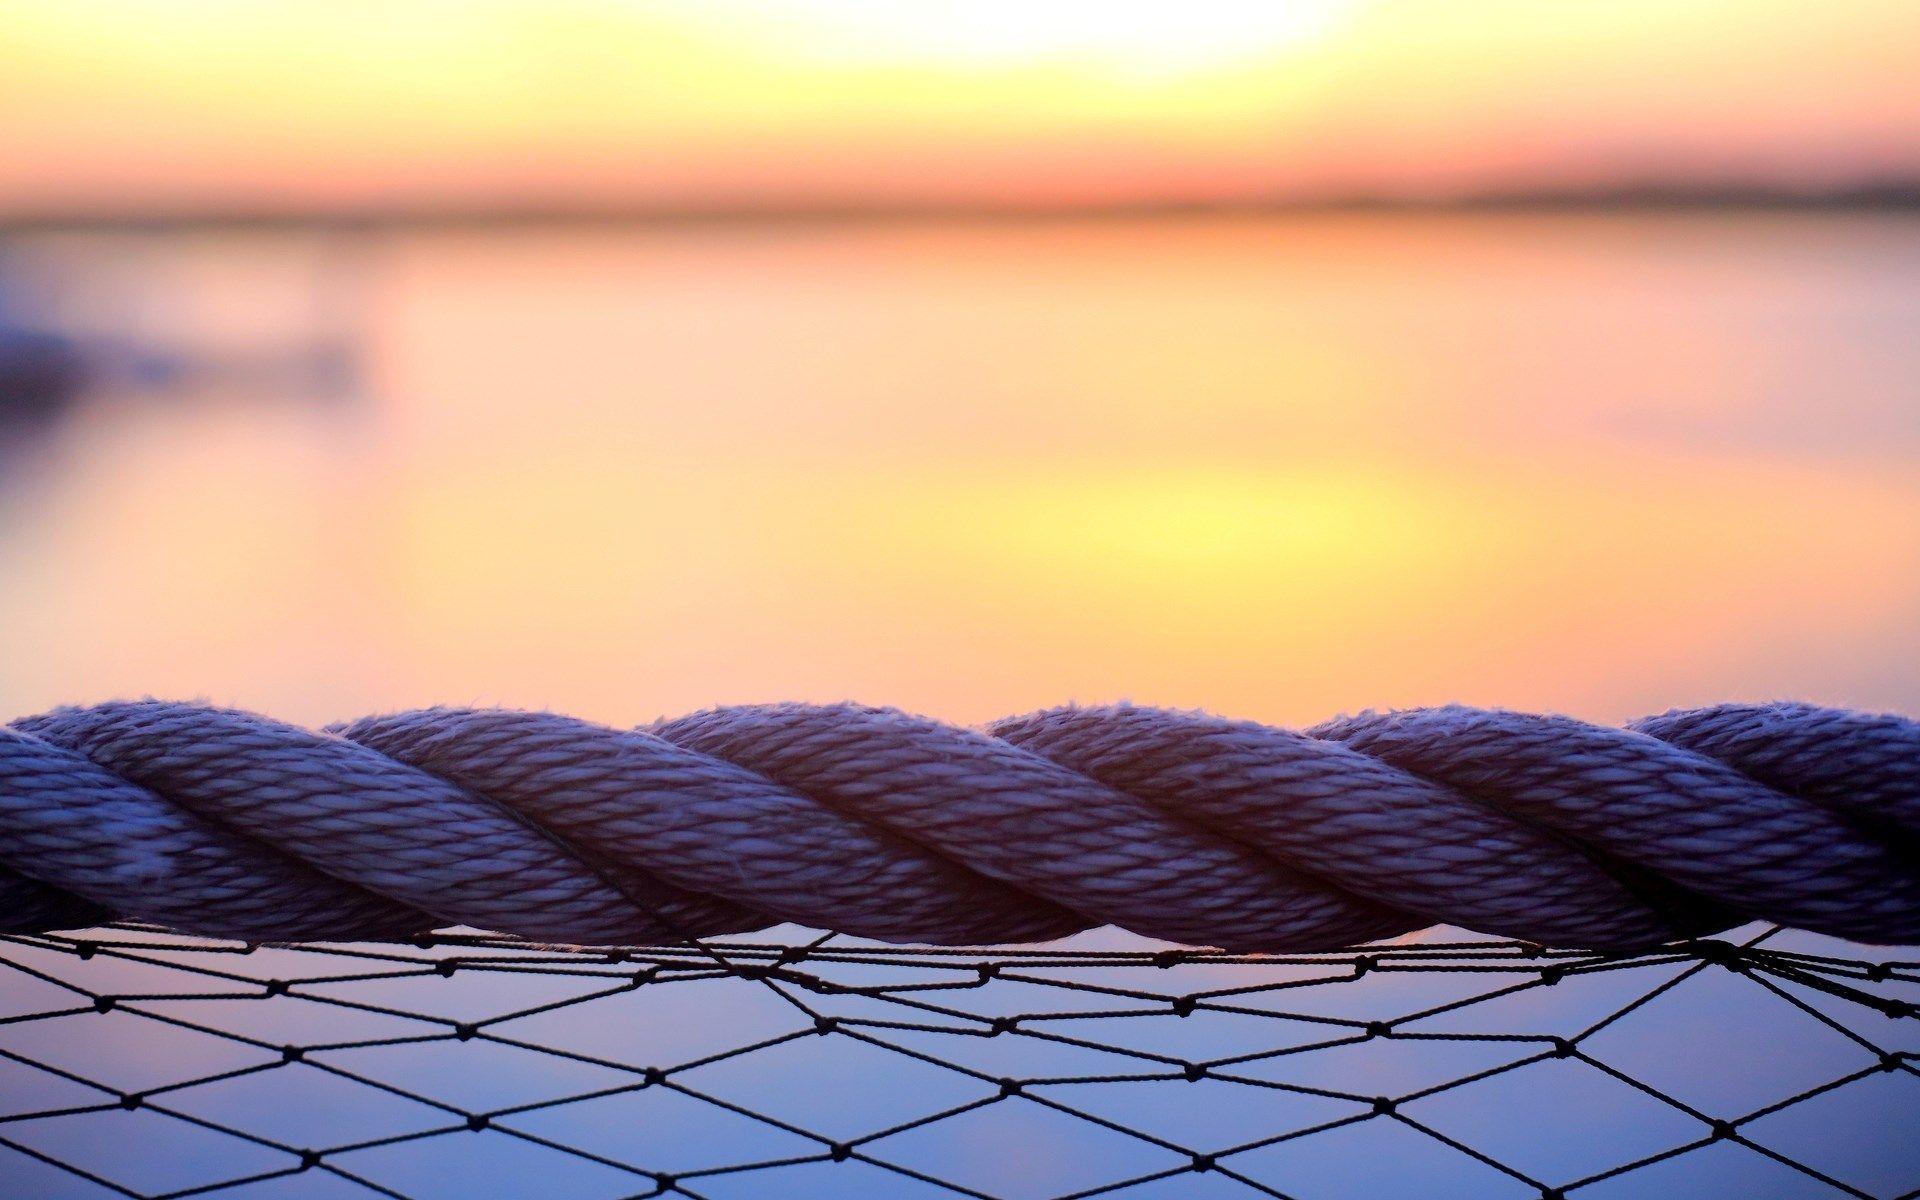 Rope Sunset Wallpaper 54246 1920x1200 px